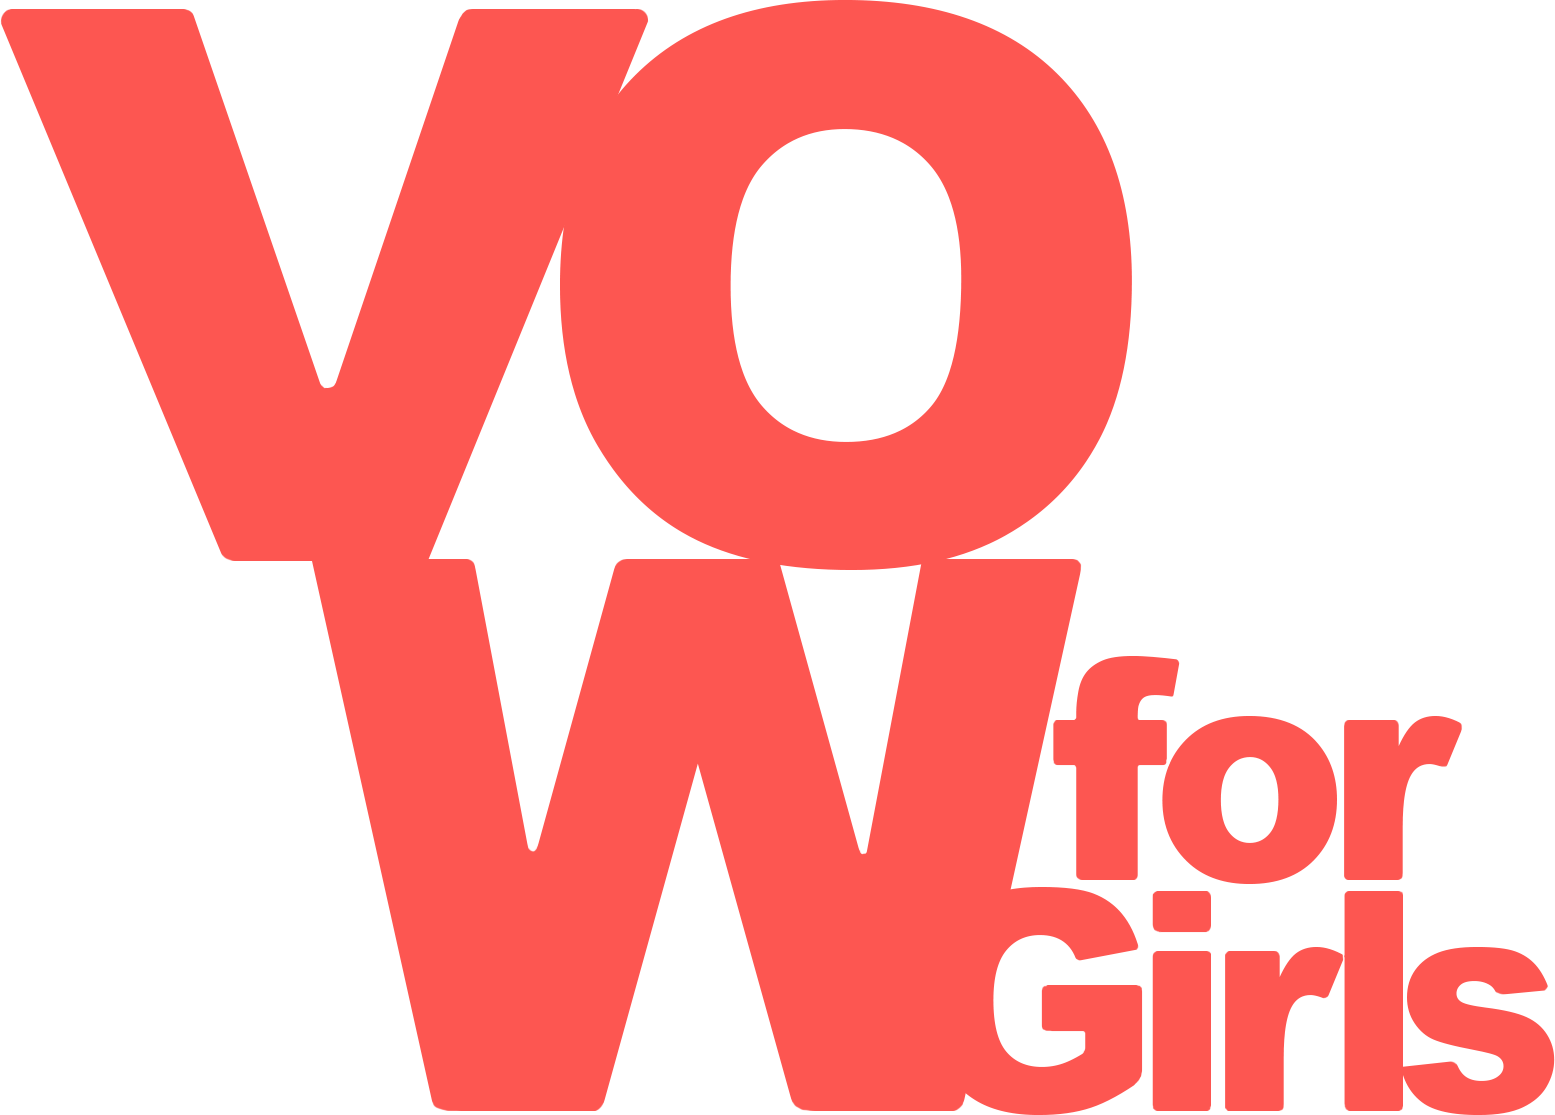 Vow For Girls Logo